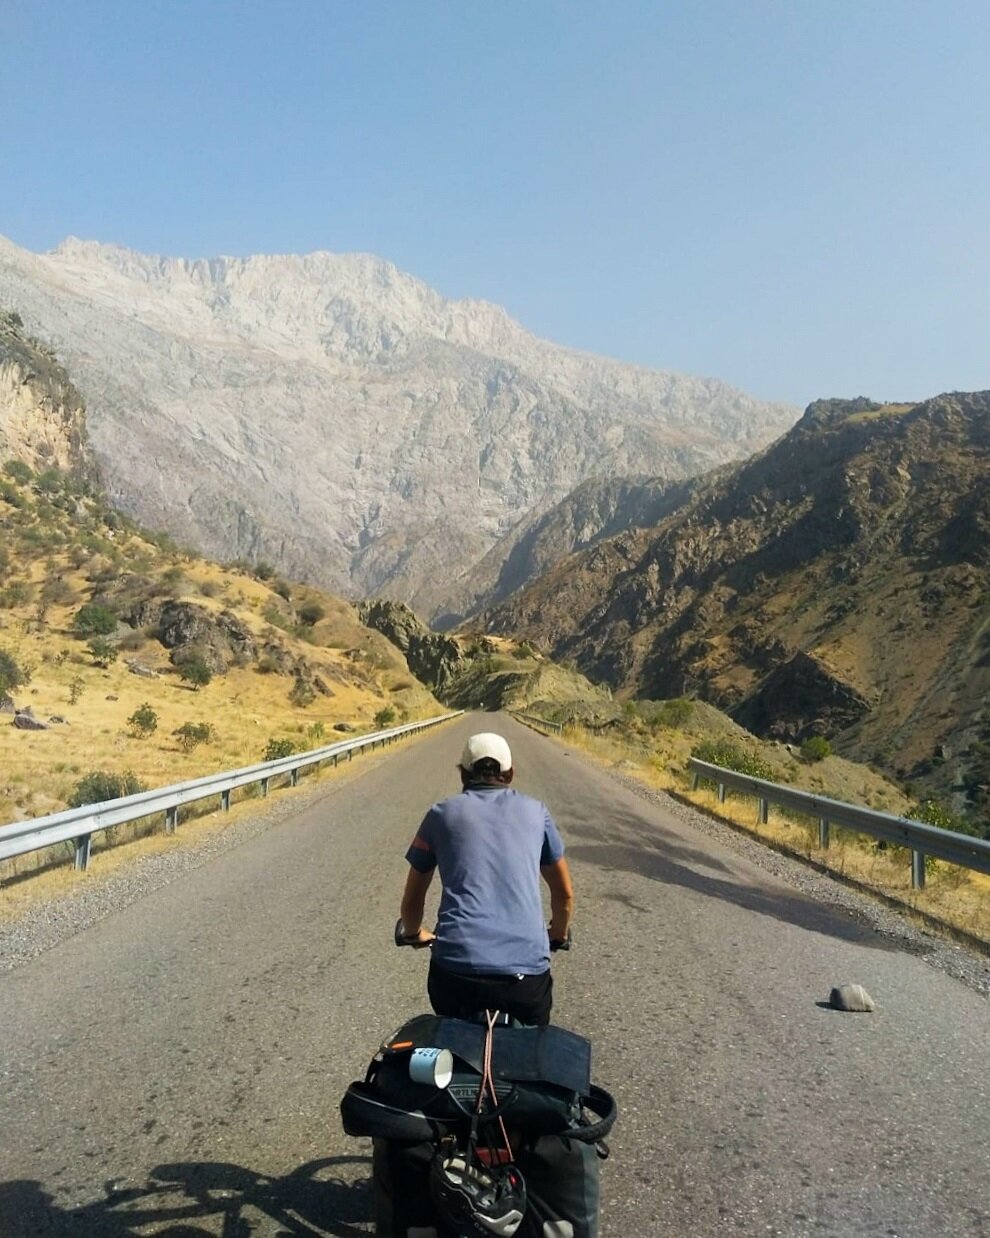 We are currently cycling between the mountain peaks, right next to the Pyandz river, which marks the border with Tajikistan and Afghanistan. 

Everytime we look to the right, we see the Afghan kids playing in the river and farmers with their livestoc